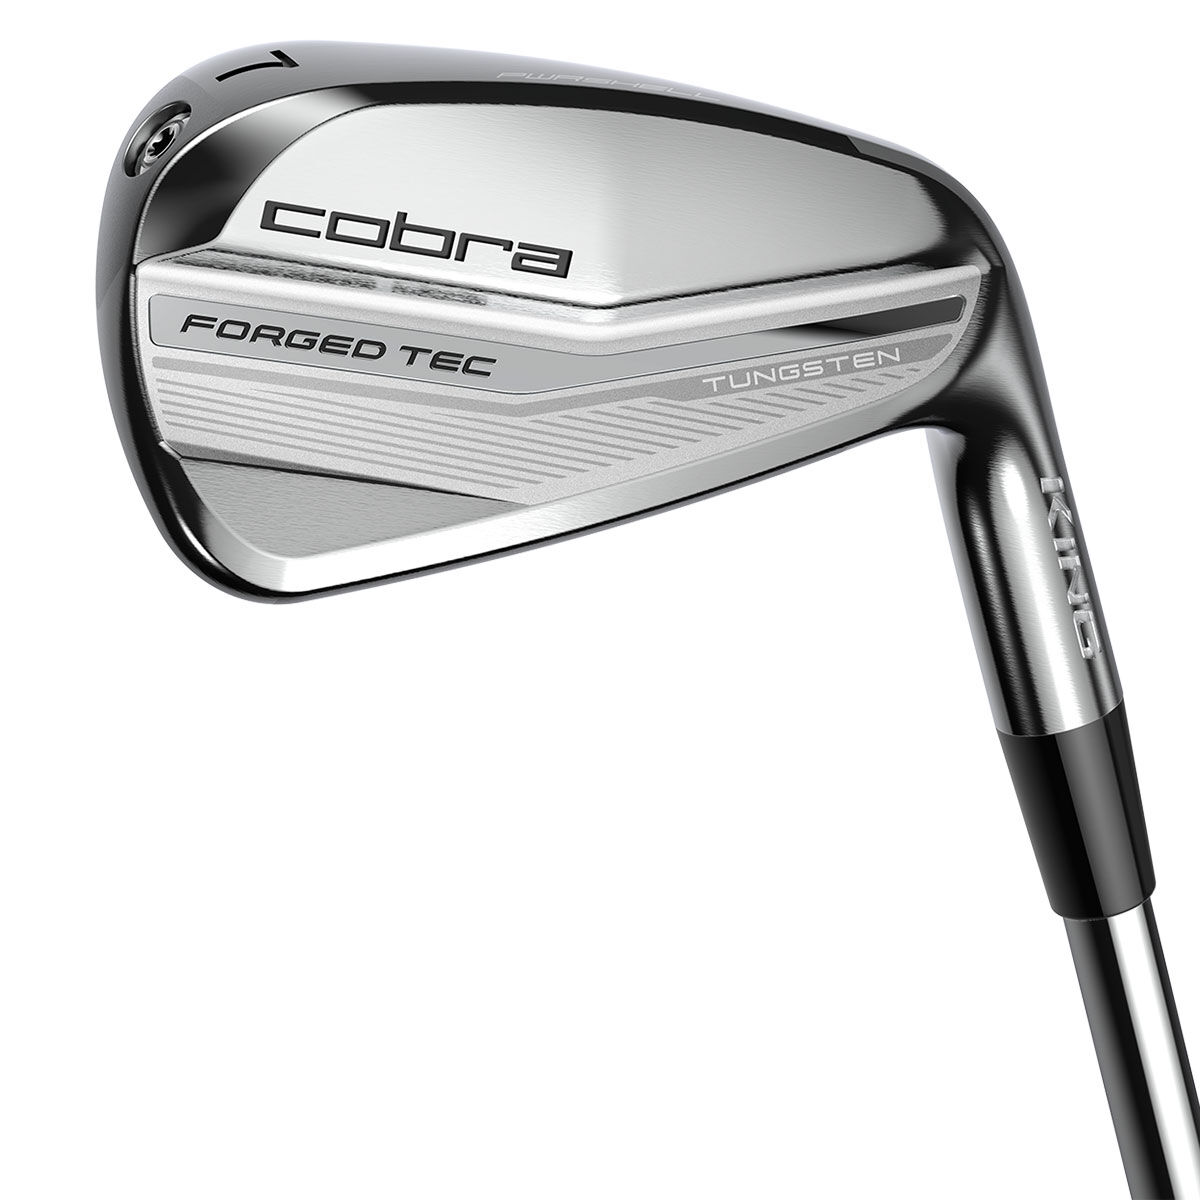 Cobra Golf Silver and Black King Forged Tec Steel Right Hand 4-Pw 7 Golf Irons | American Golf, One Size